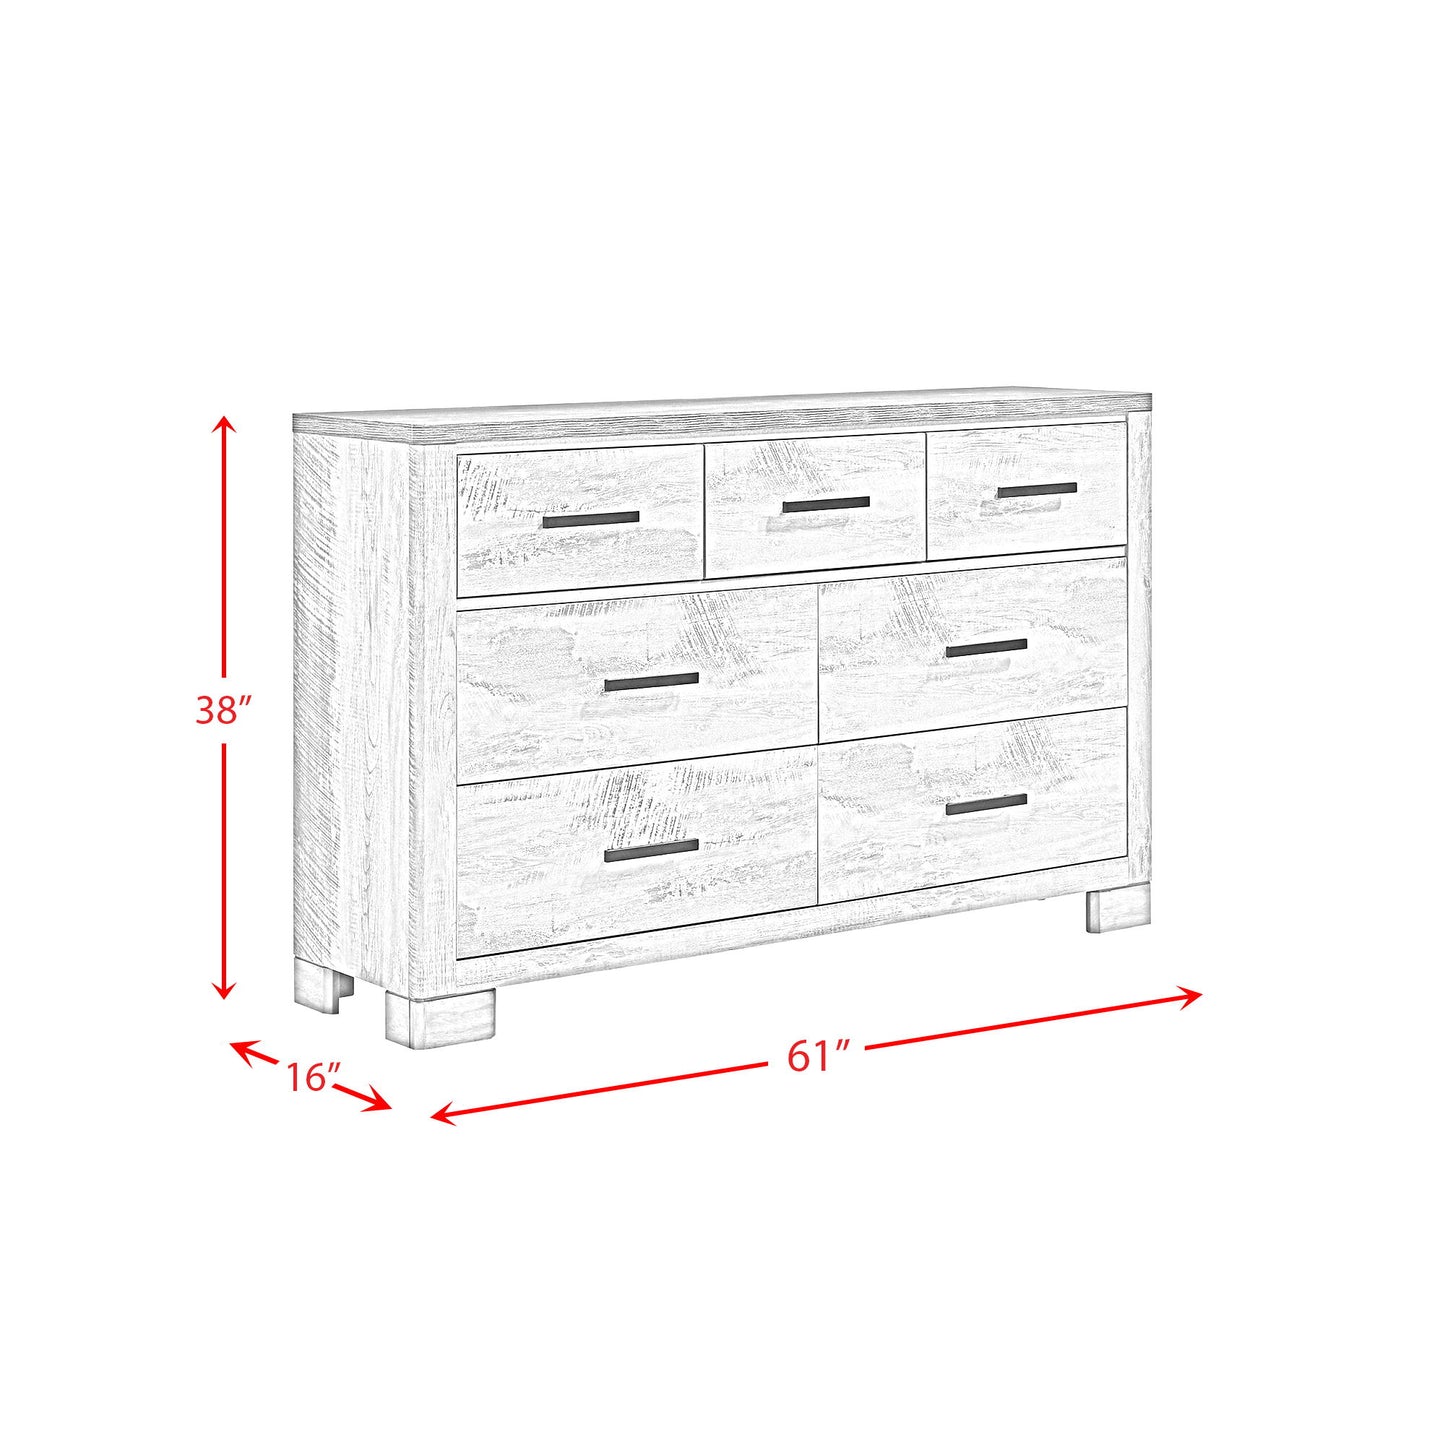 Millers Cove - 6-Drawer Dresser - Distressed Gray